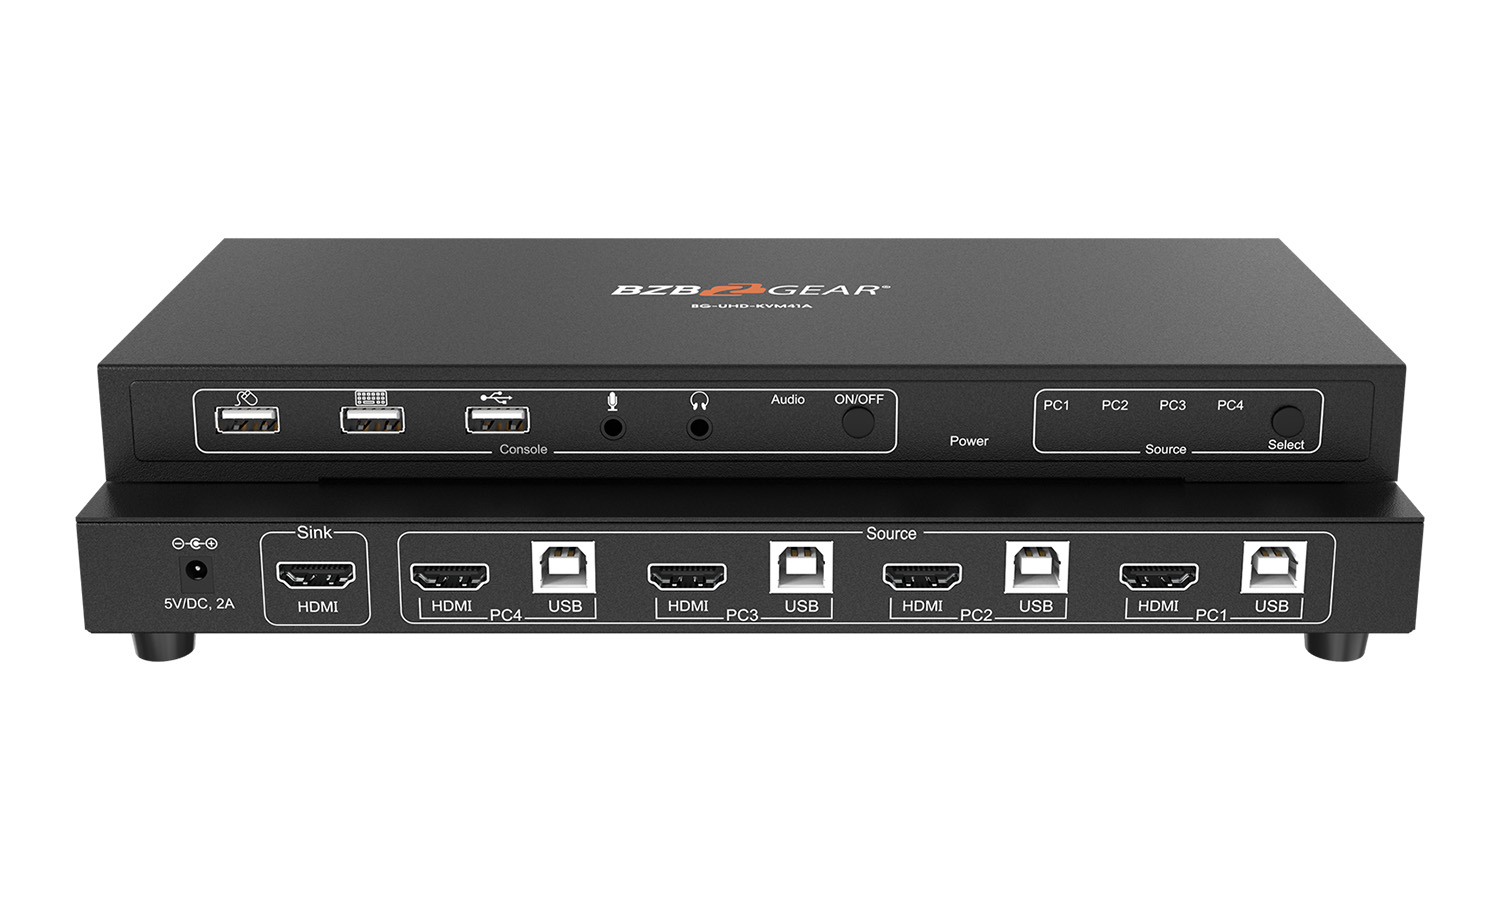 BZBGEAR BG-UHD-KVM41A 4x1 4K UHD KVM Switcher with USB 2.0 Ports for Peripherals and Audio Support